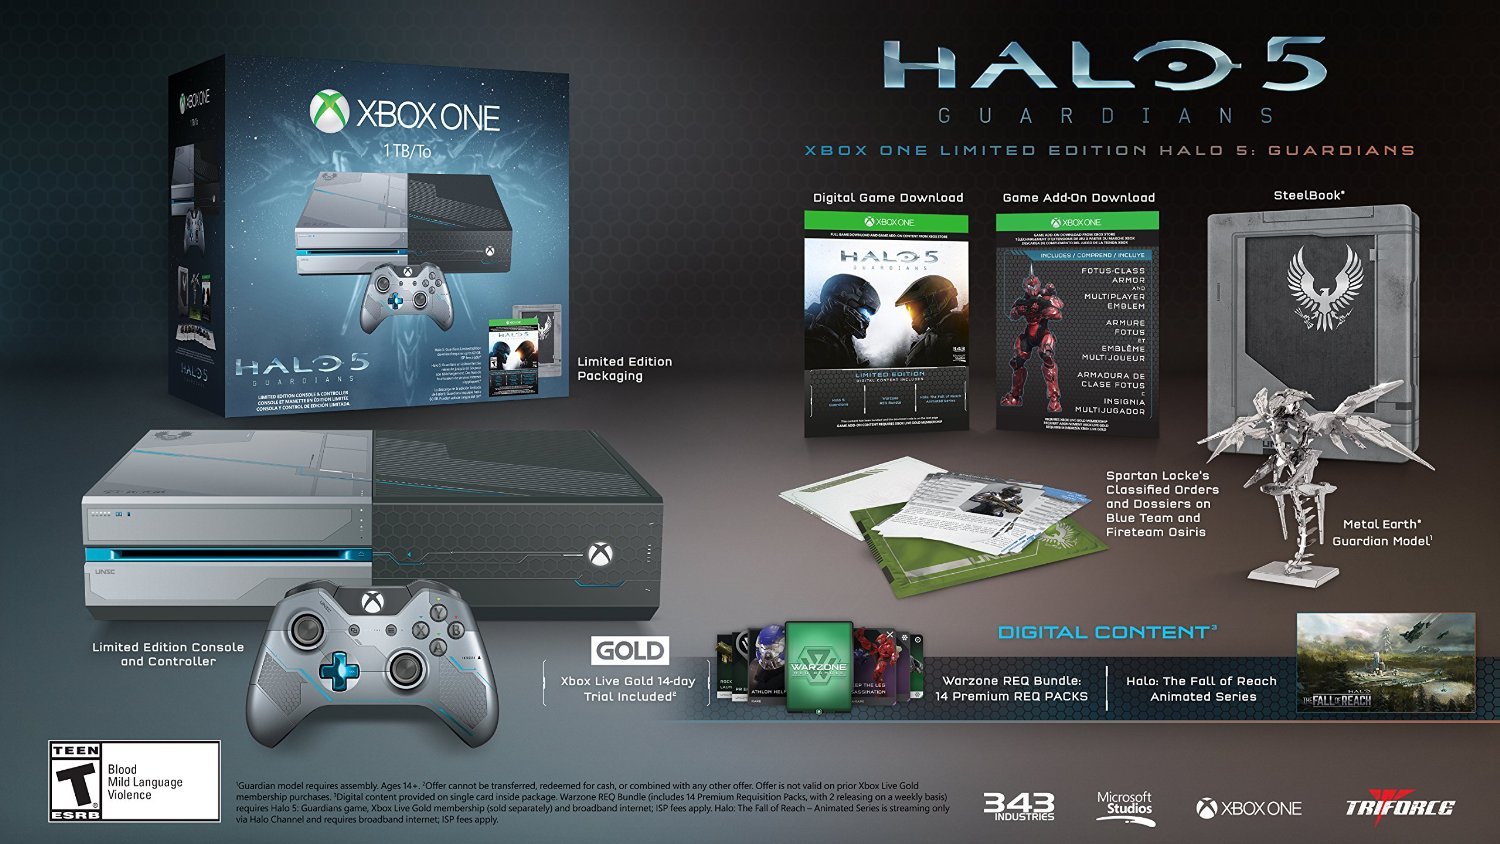 Xbox One 1TB Console - Halo 5: Guardians Limited Edition Bundle + Xbox One Wireless Controller + Forza Horizon 2 [Emailed Digital Code]